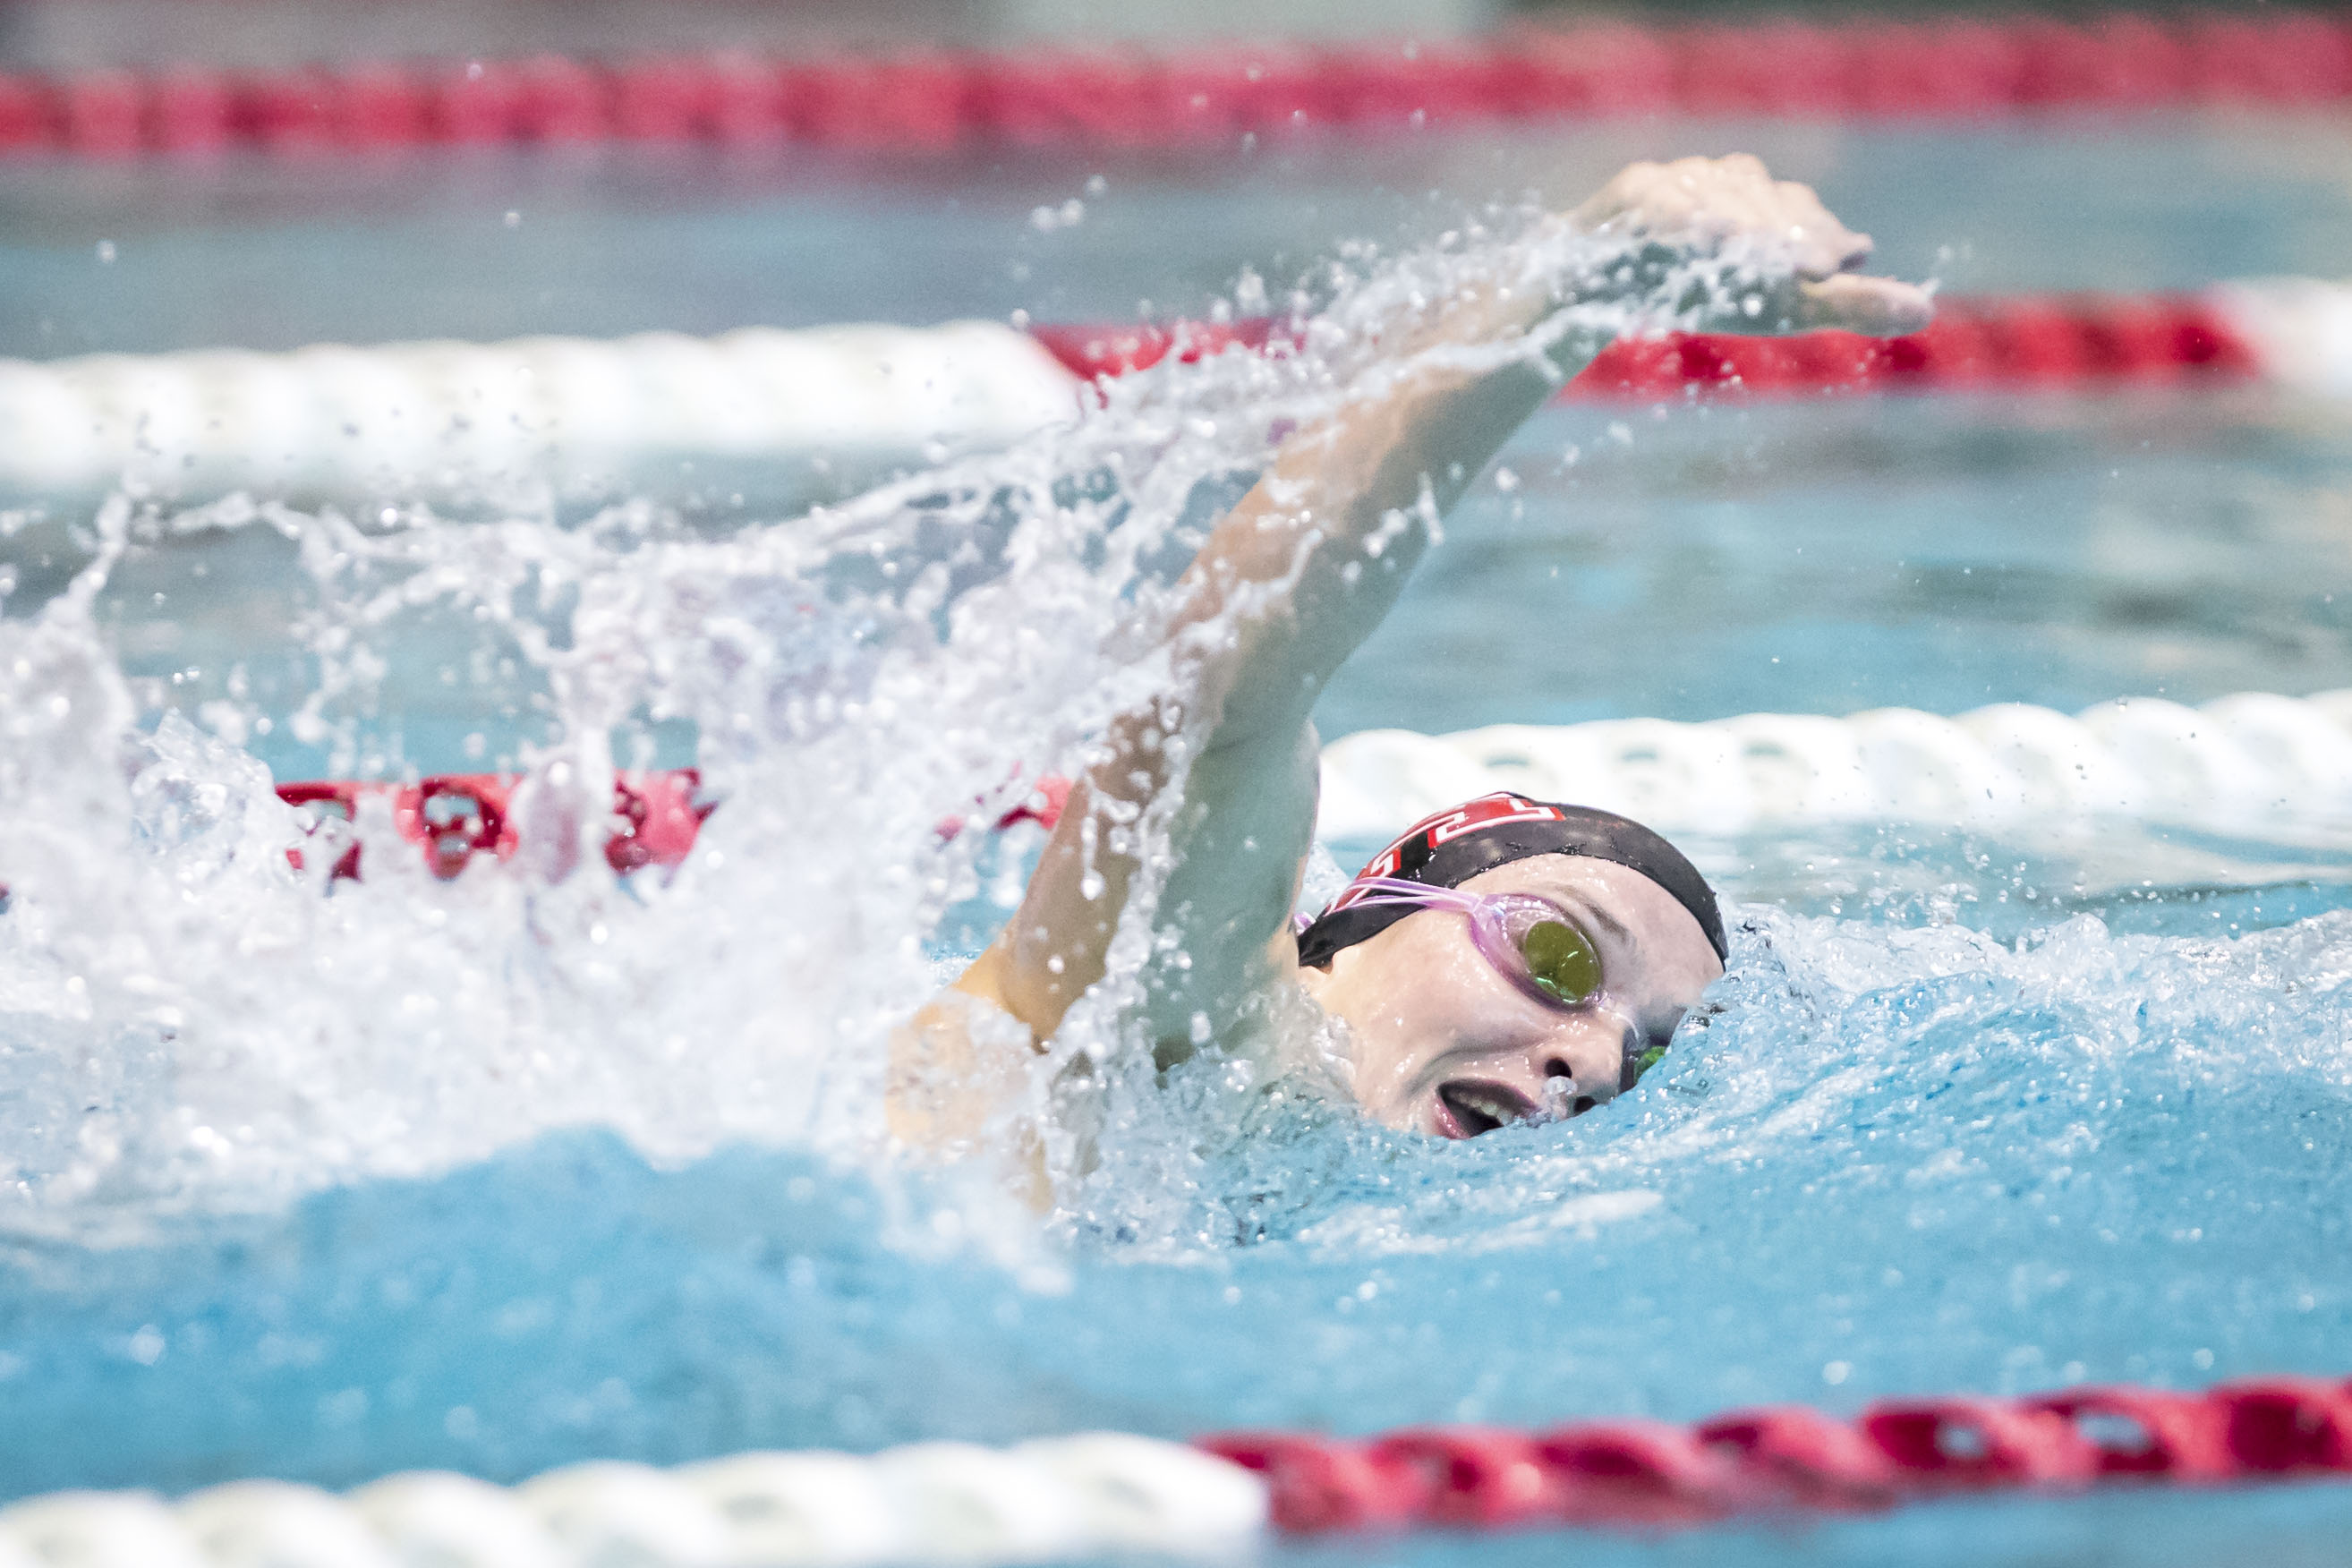 Heading into her third year with the Cougars, junior Katie Power looks to improve on a career that has already seen the swimmer win two American Athletic Conference team titles. | Courtesy of UH athletics